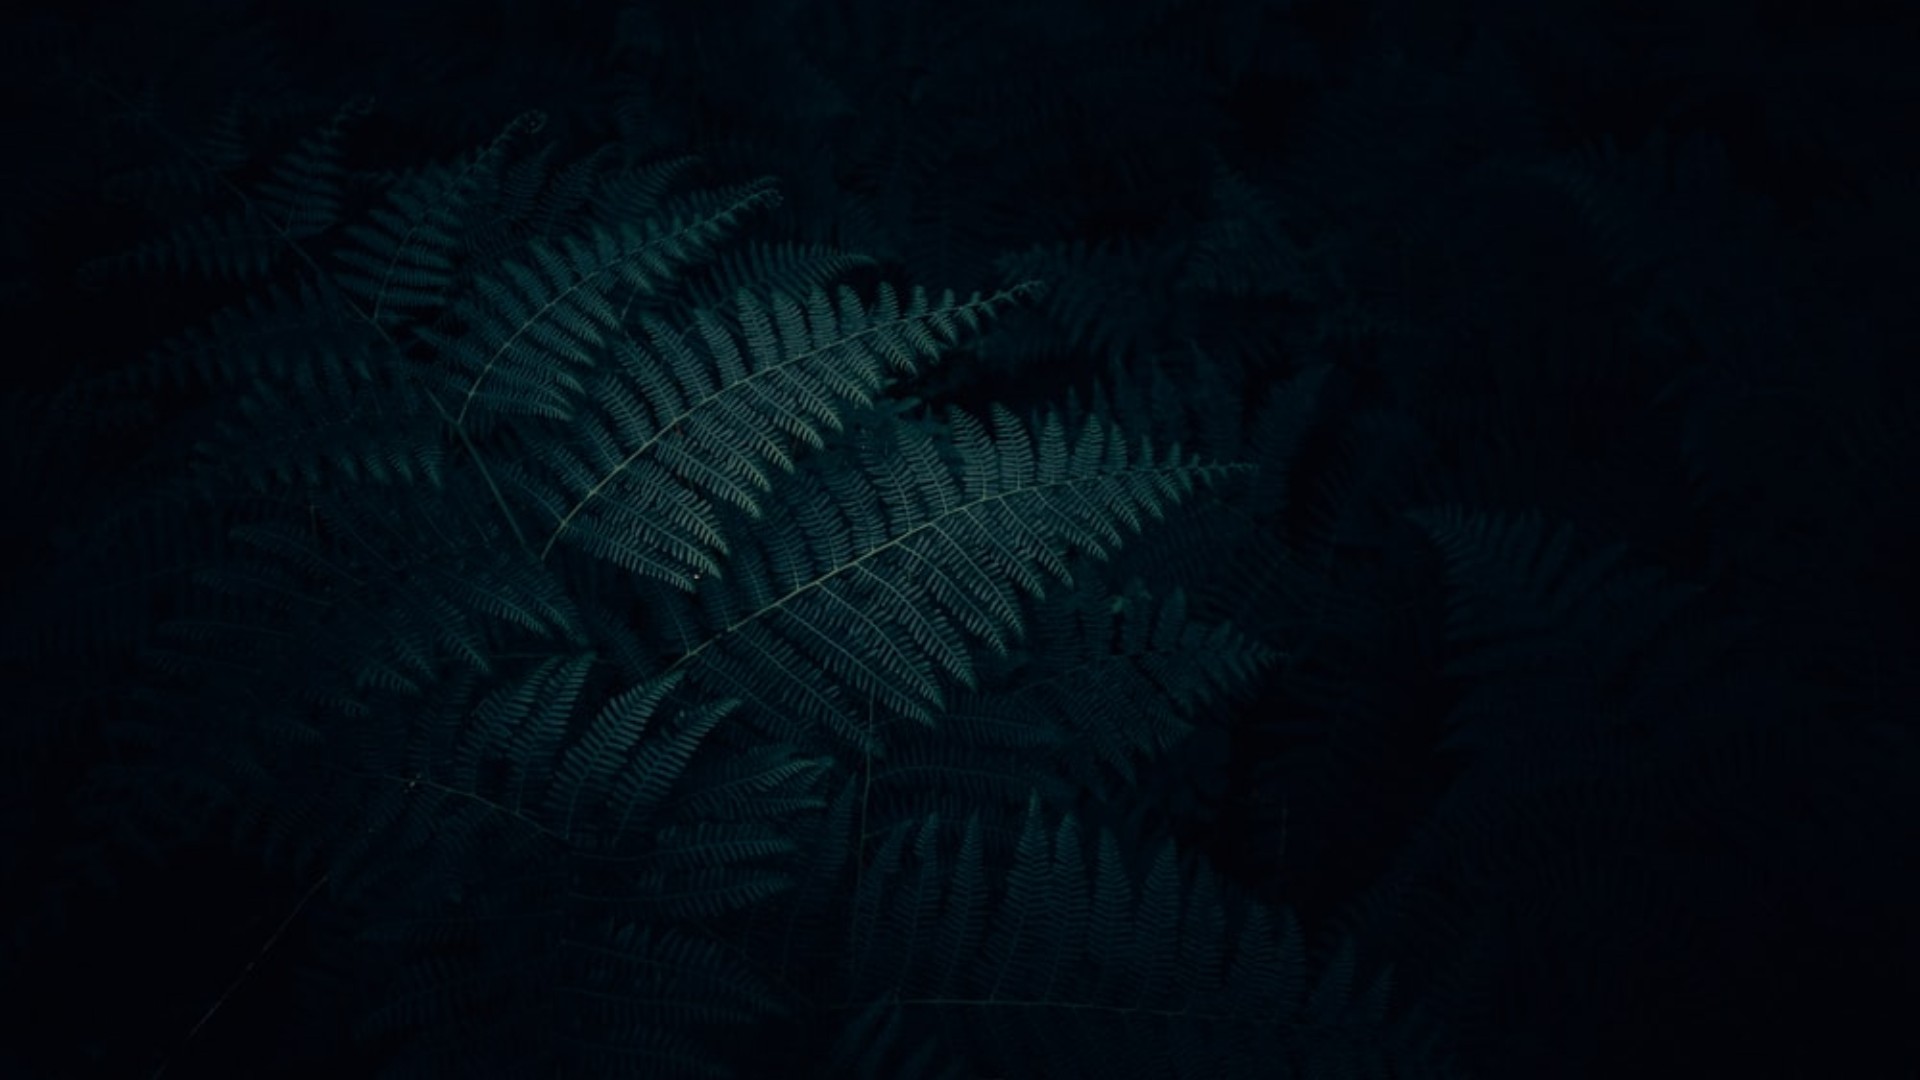 4k hd wallpaper for computer desktop with dark aesthetic and dope